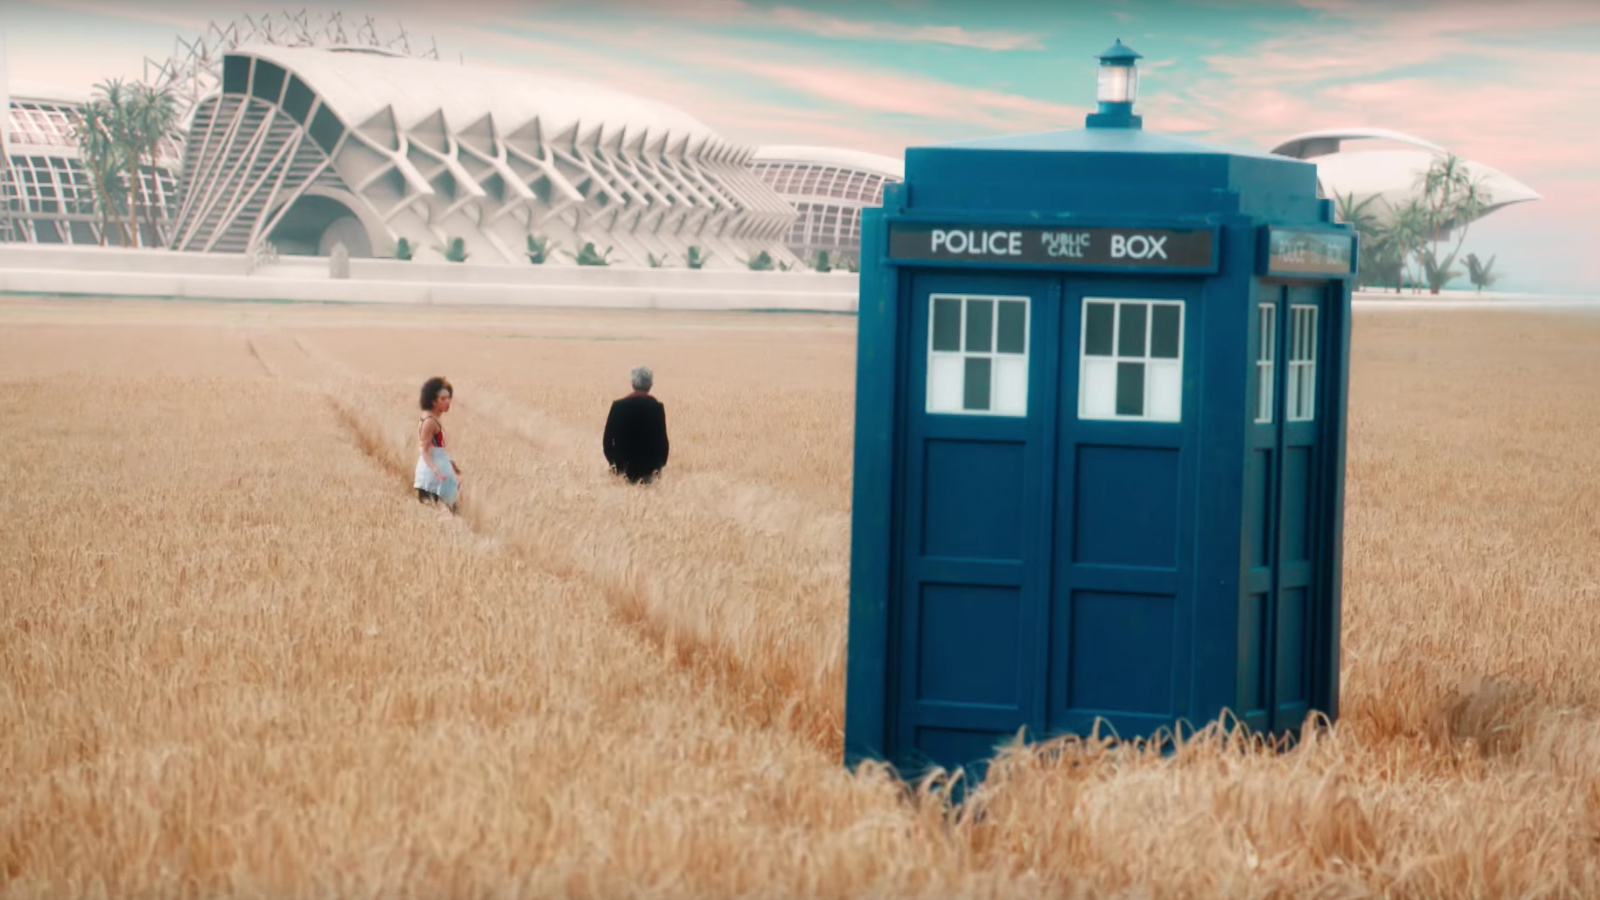 Doctor Who S1002 review A quirky idea that never reaches its full potential